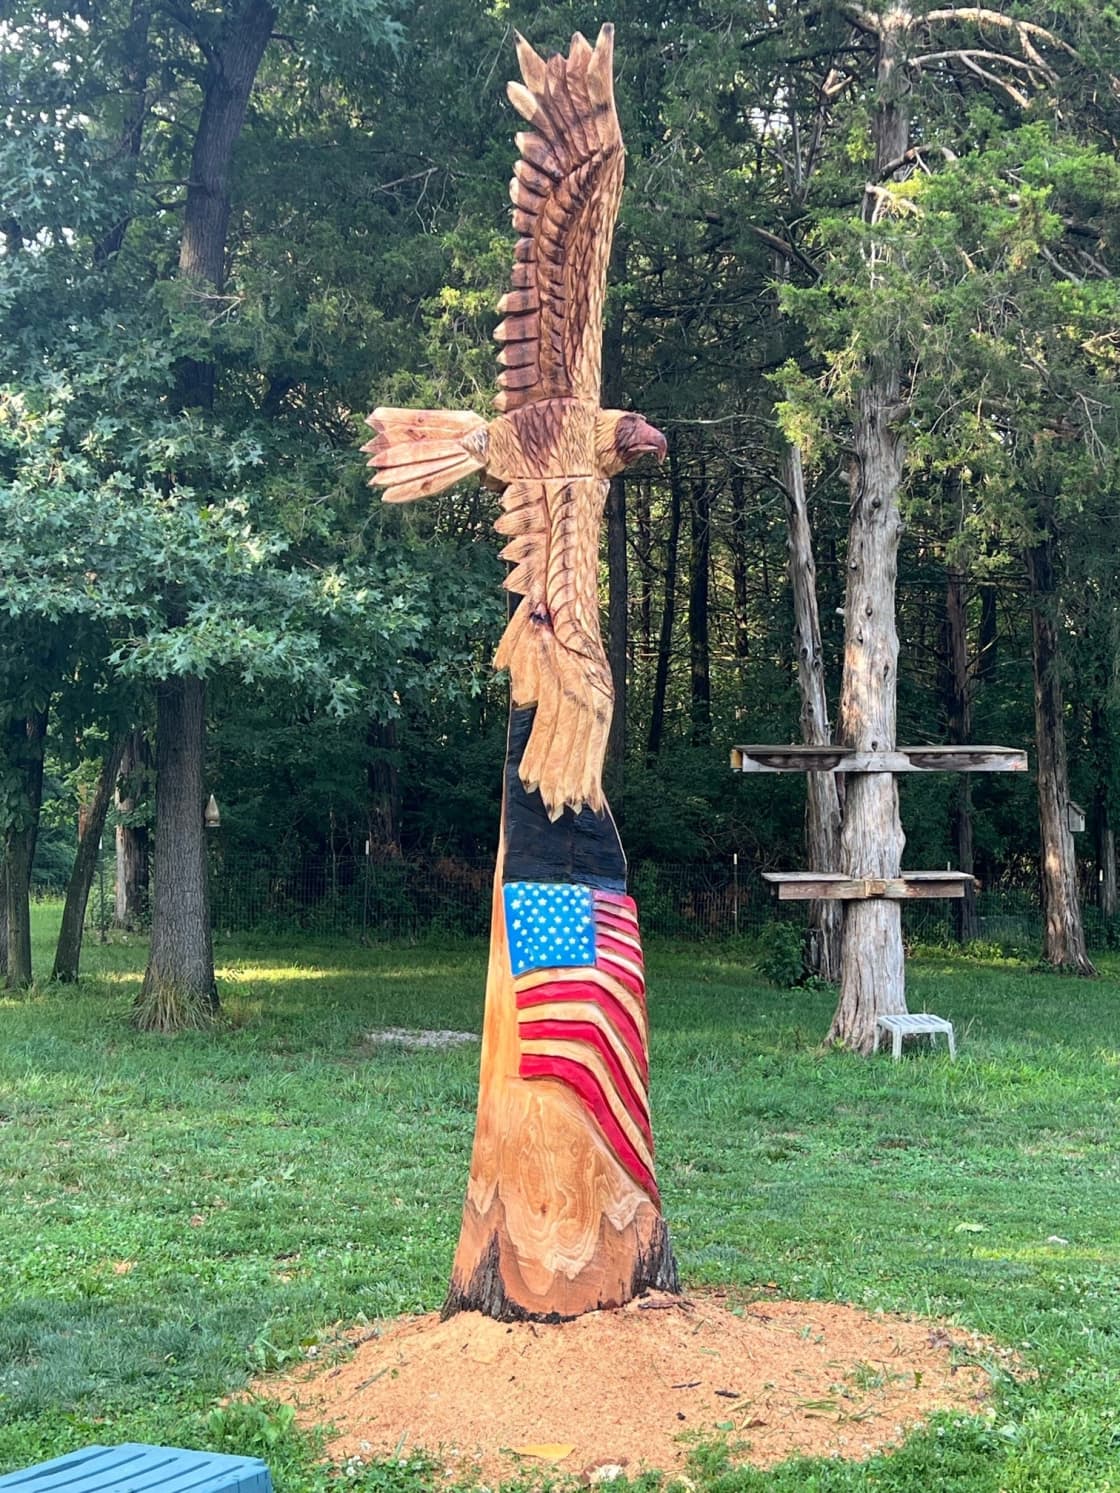 Soaring eagle sculpture on our property.
